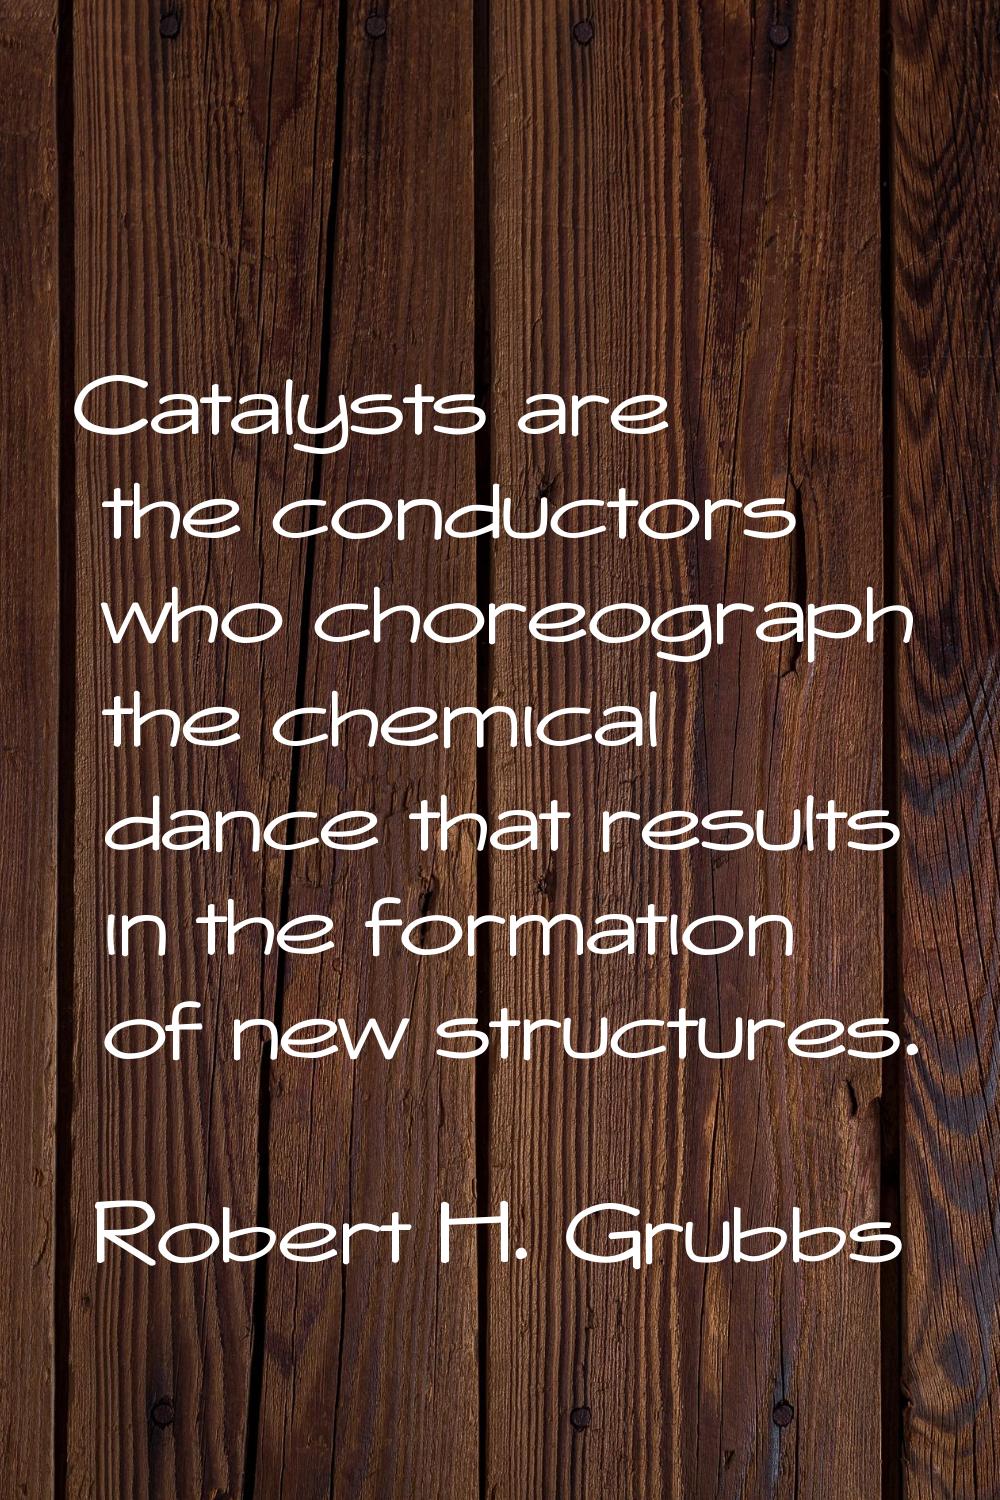 Catalysts are the conductors who choreograph the chemical dance that results in the formation of ne